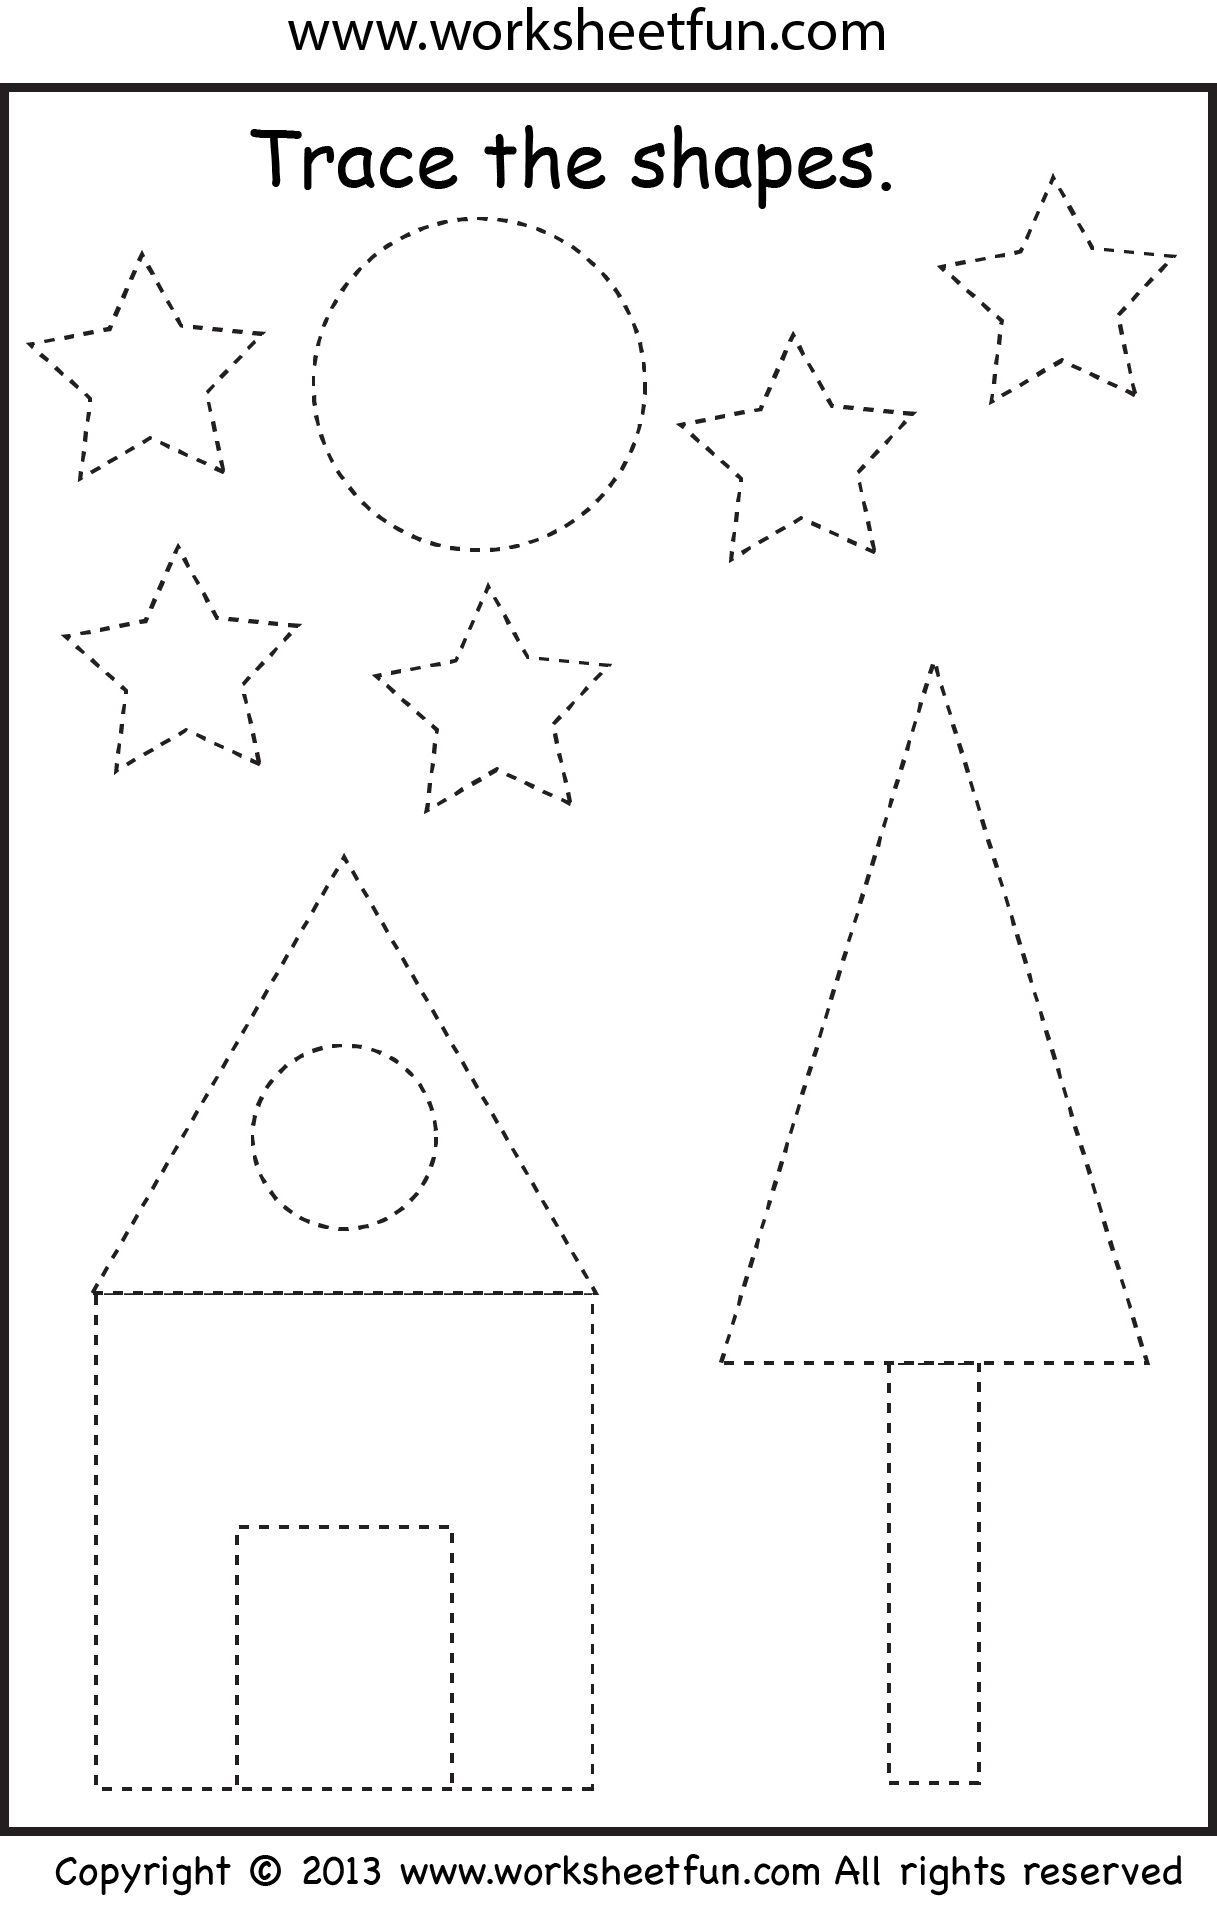 picture-tracing-shapes-two-worksheets-free-printable-worksheets